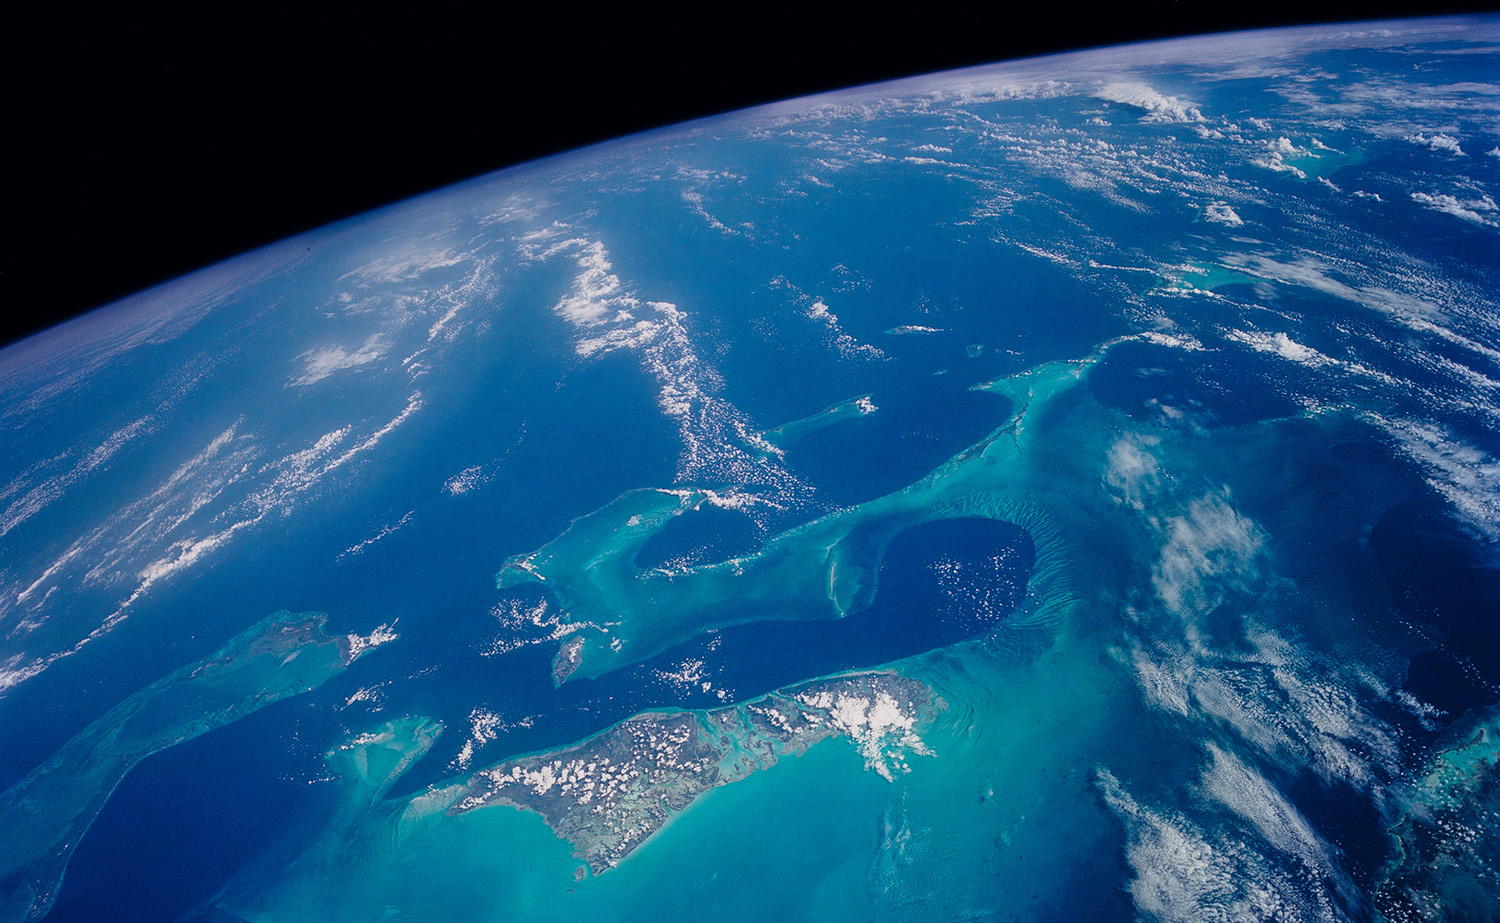 Bahamas from STS-52